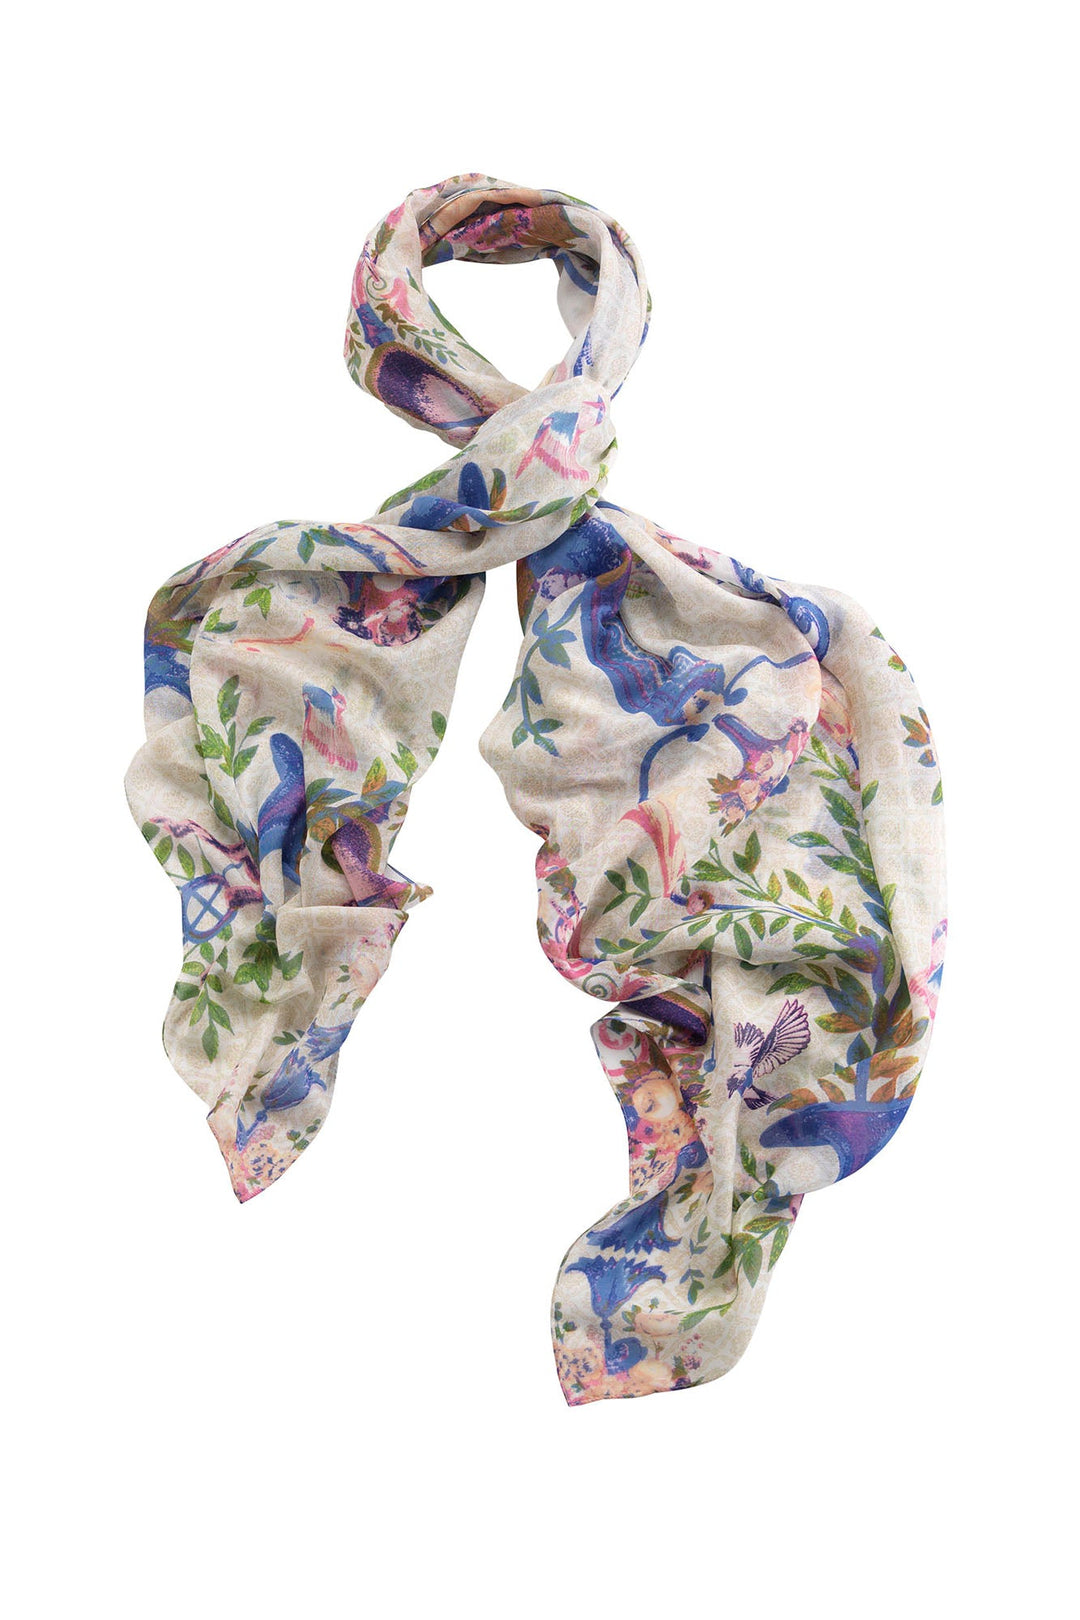 opulent print light weight scarf The One Hundred Stars Opulent Pastel Scarf  features pastel peaches, pinks, and statement blues to create an intricate pattern, which looks great styled with a white shirt, blue jeans and neutral heels for Spring Summer. 